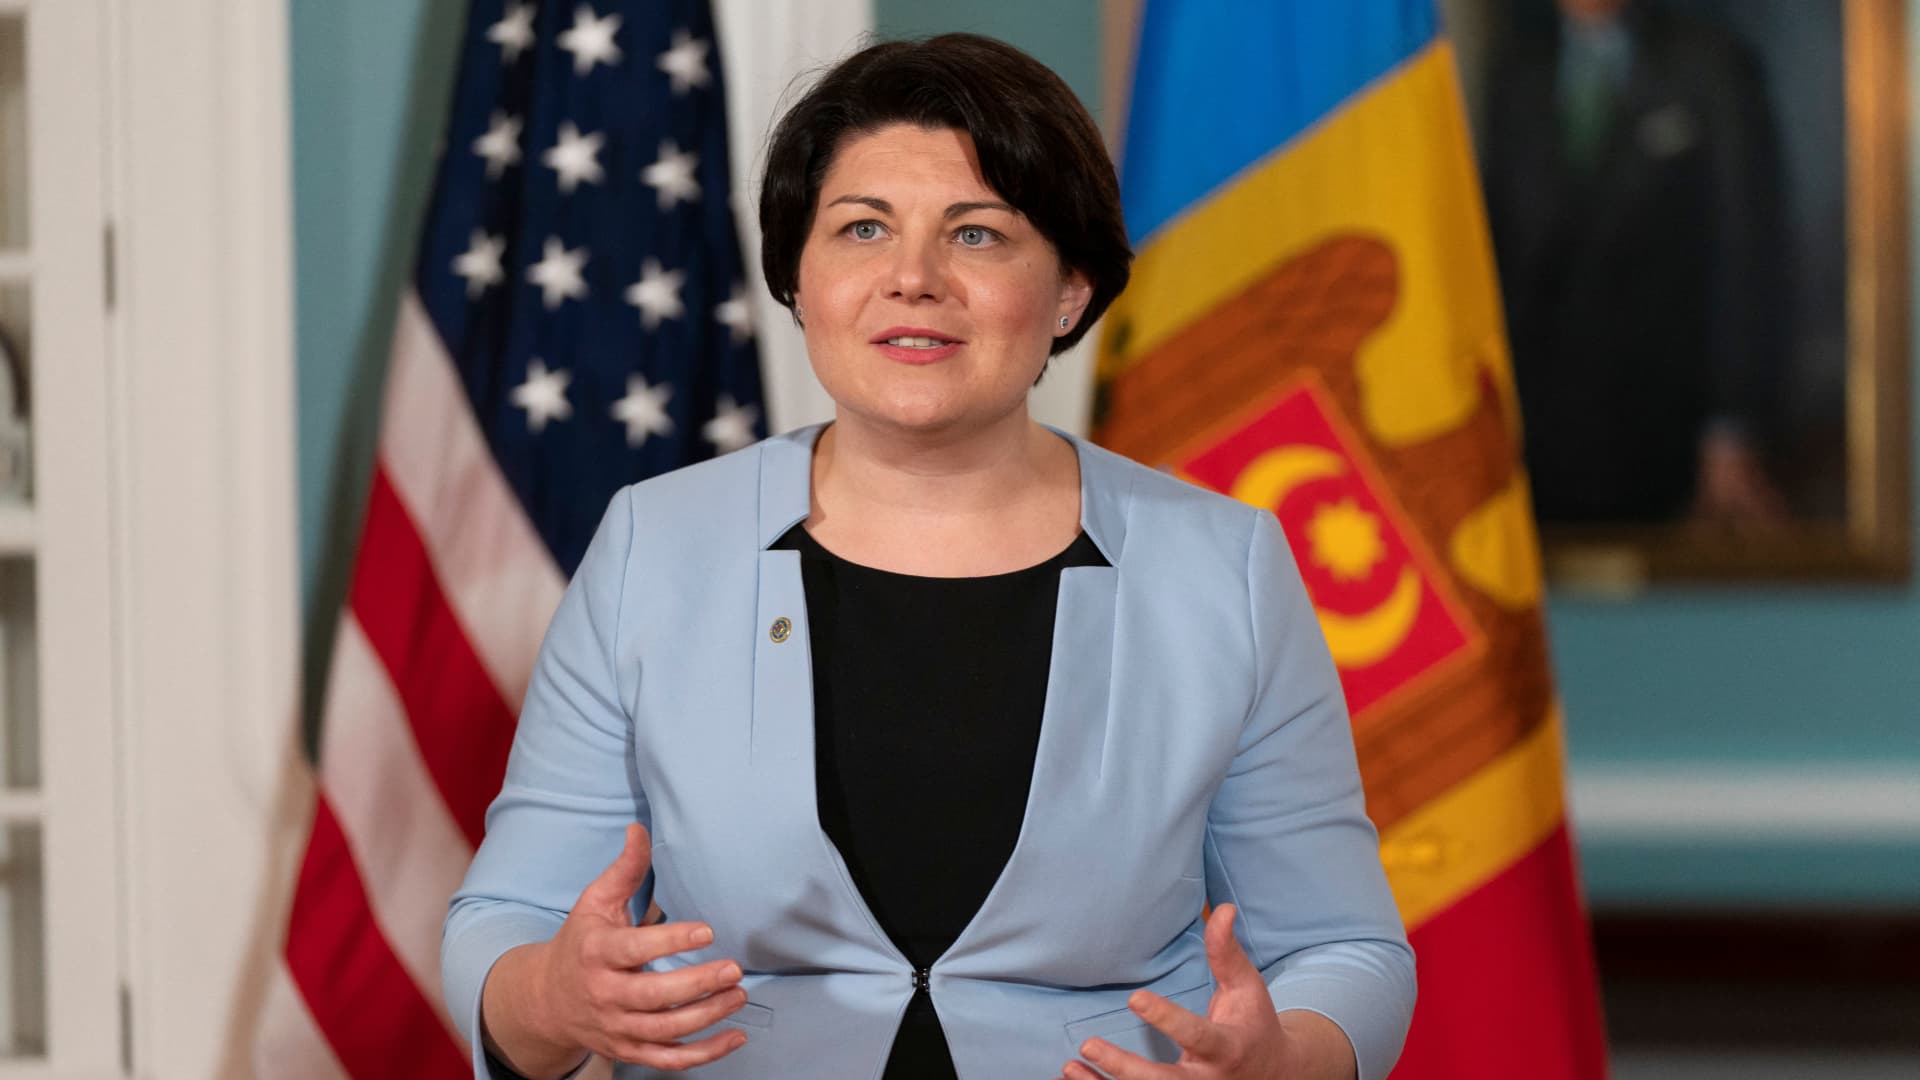 Prime Minister of Moldova Natalia Gavrilita speaks in the Treaty Room at the State Department in Washington, DC, on July 19, 2022, ahead of a meeting with US Secretary of State Antony Blinken.